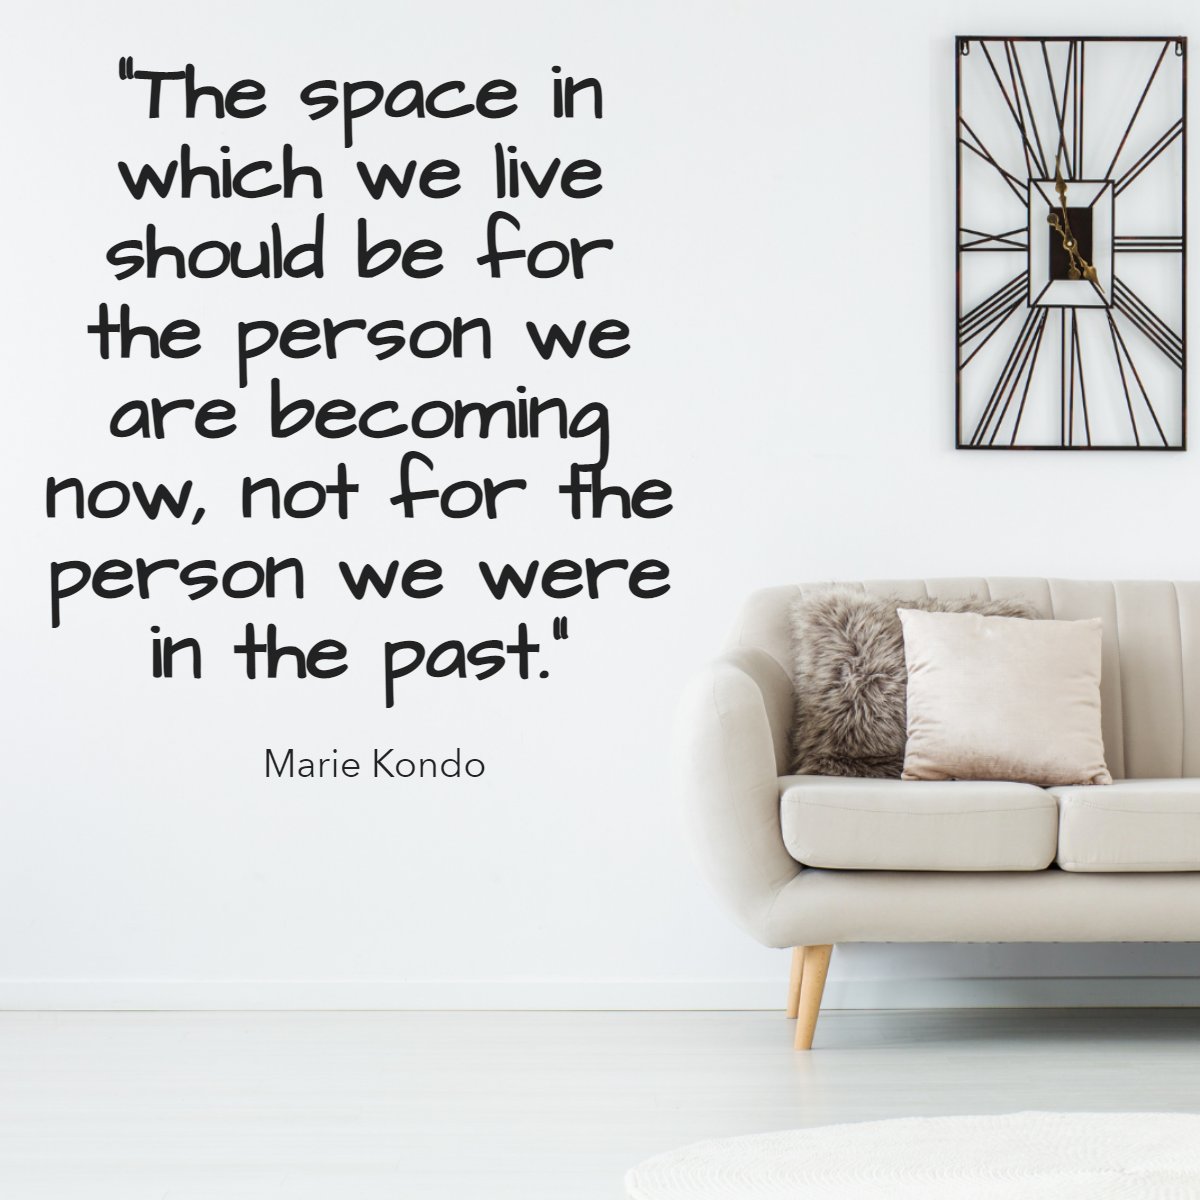 'The space in which we live should be for the person we are becoming now, not for the person we were in the past.' 
― Marie Kondo 📖

#space #realestate #room #buy #sell #property #home #house #quoteoftheday #mariekondo #quotes
 #angelagribbinsrealtor